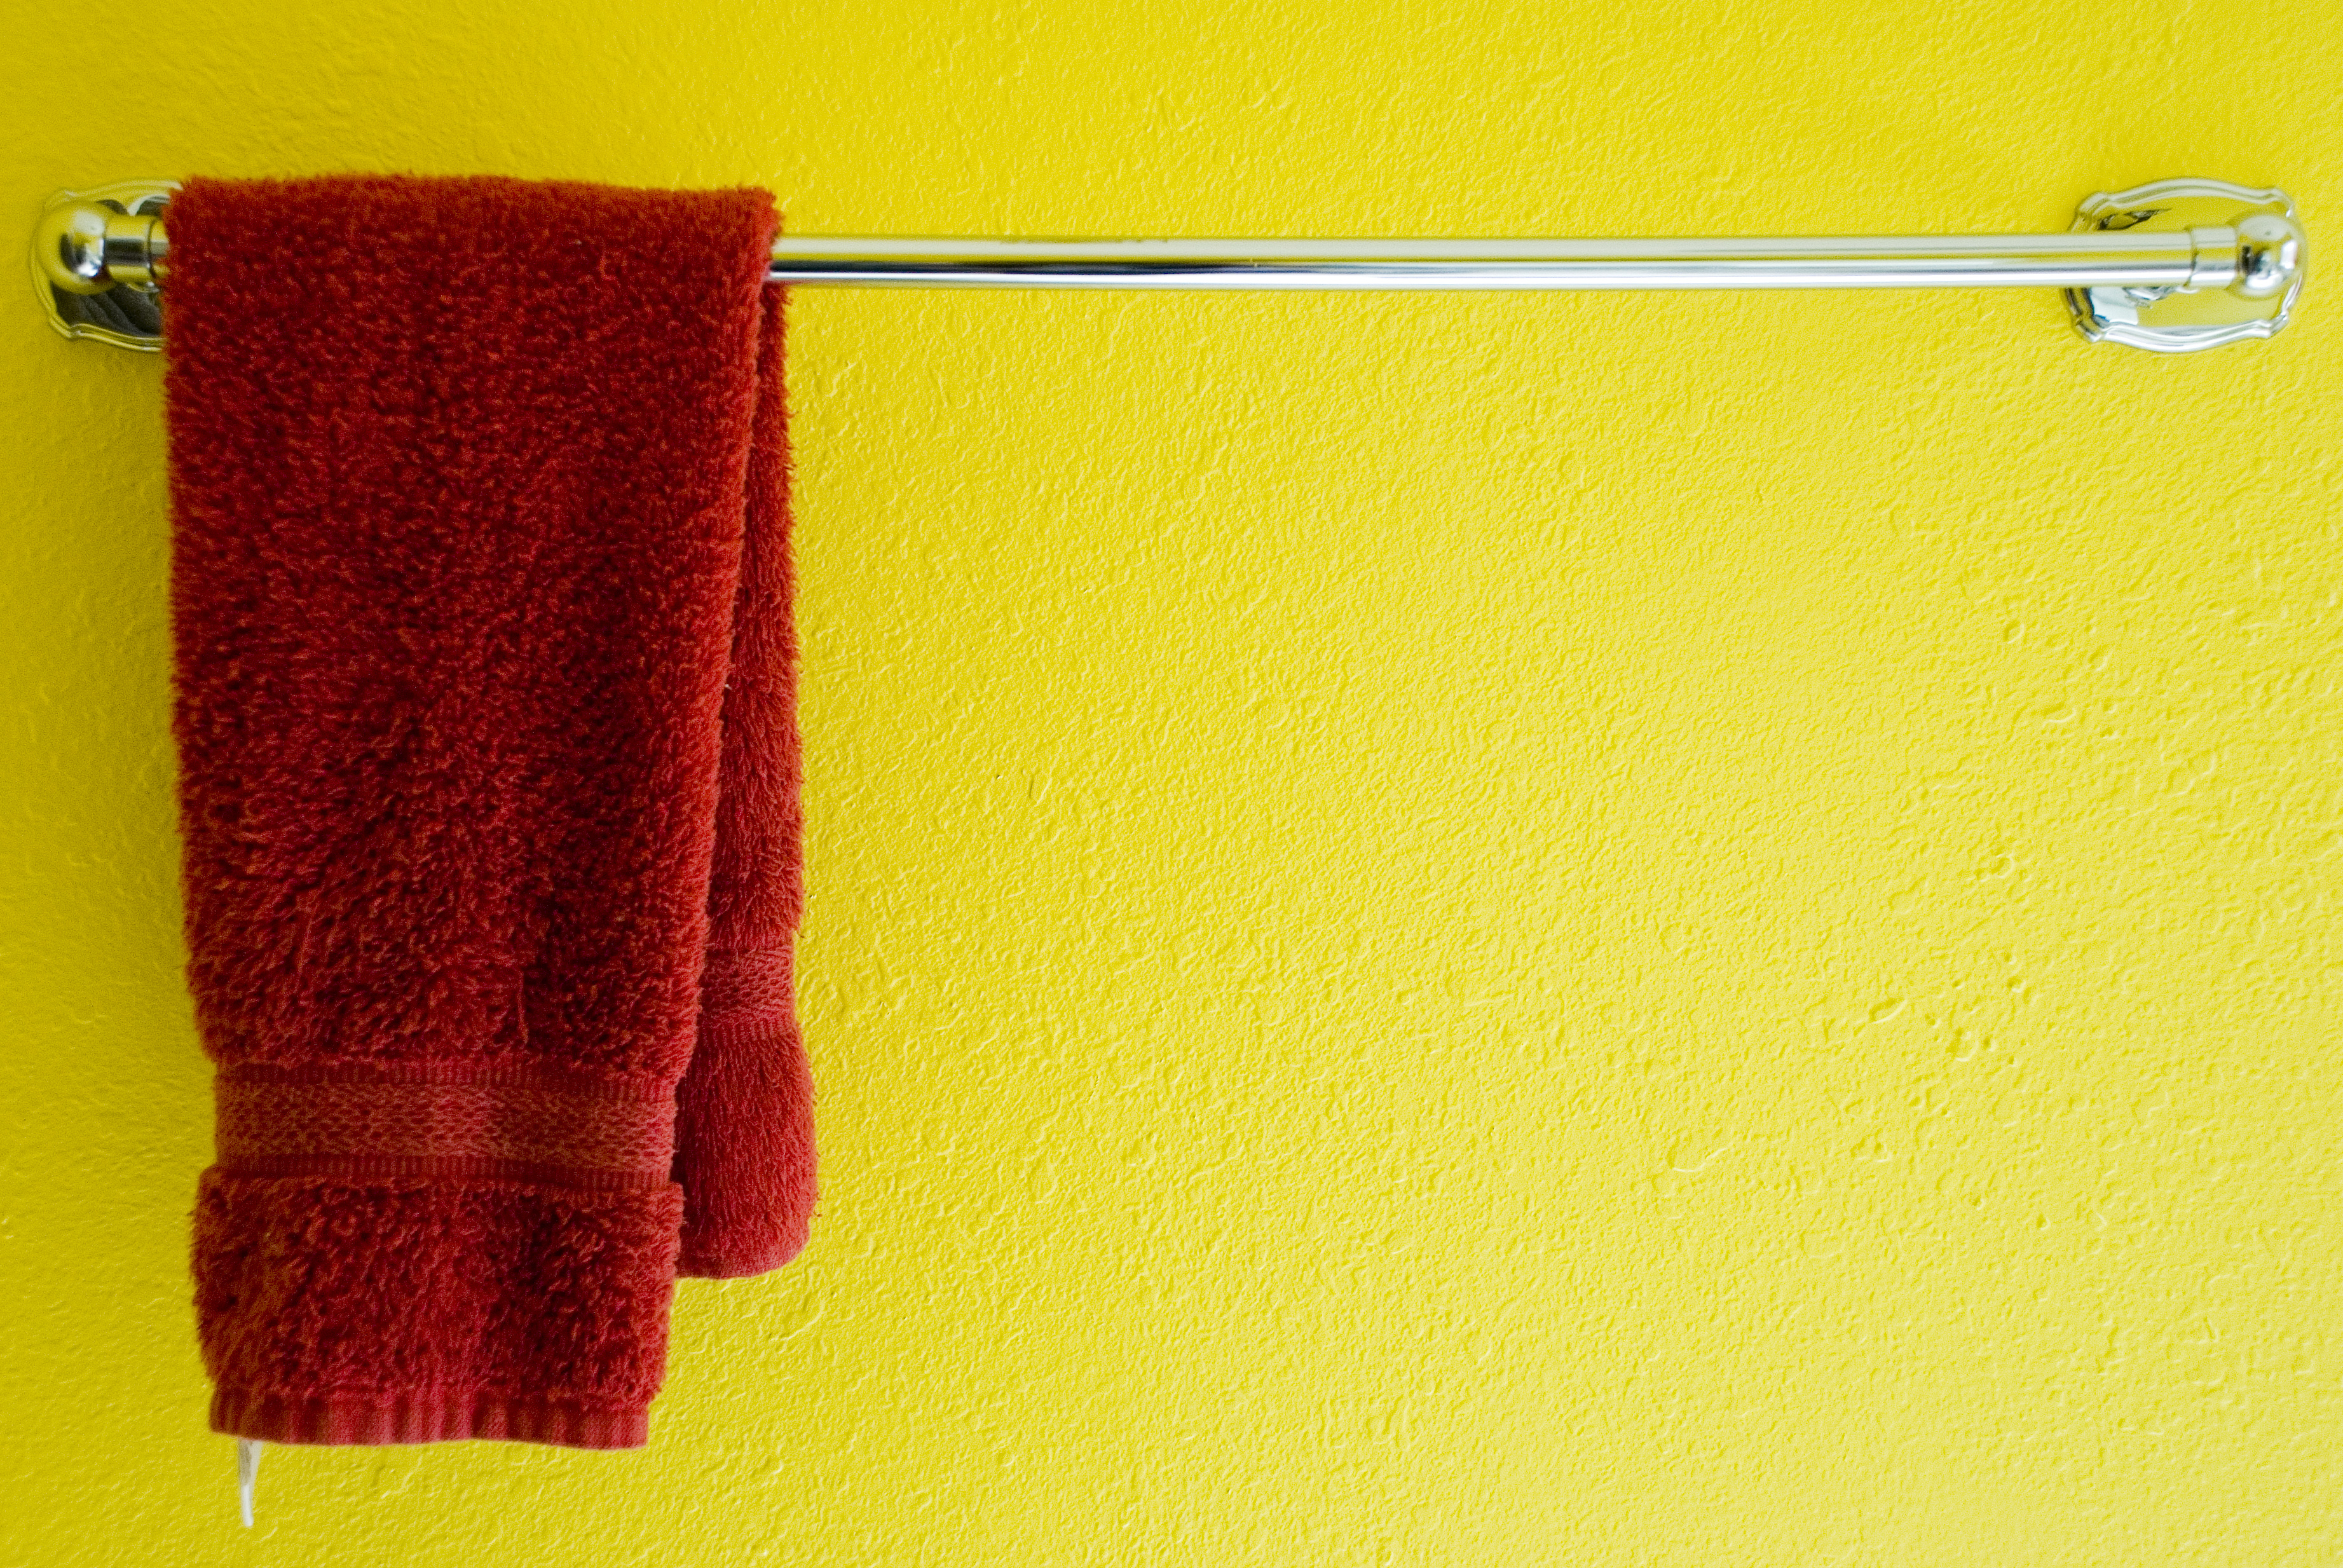 Red towel hanging on towel rack in front of a yellow wall